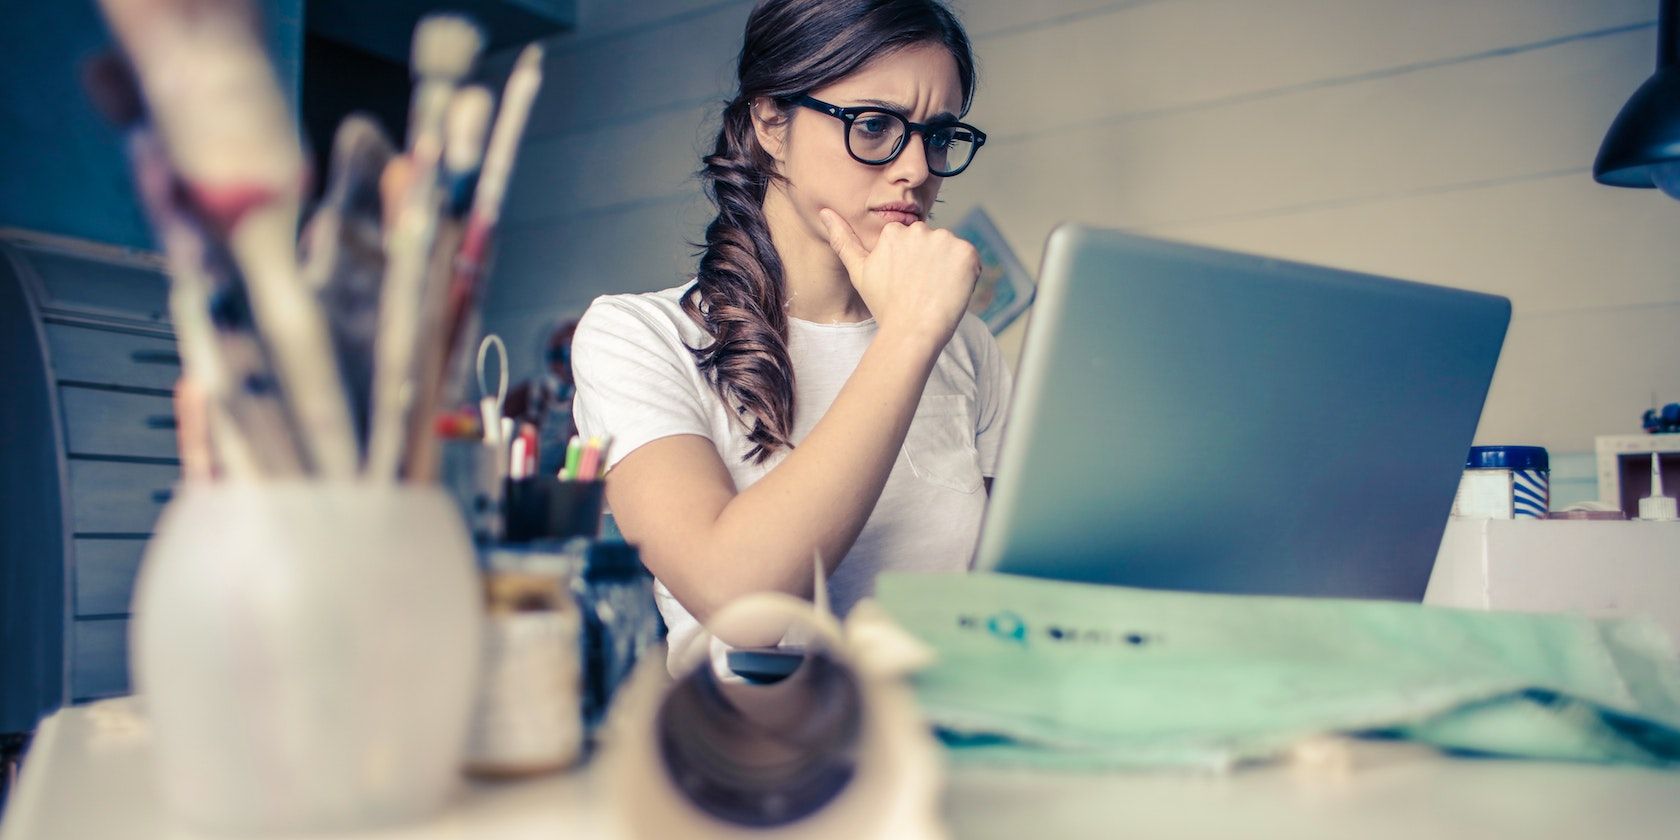 Photo of a woman staring perplexedly into a laptop.